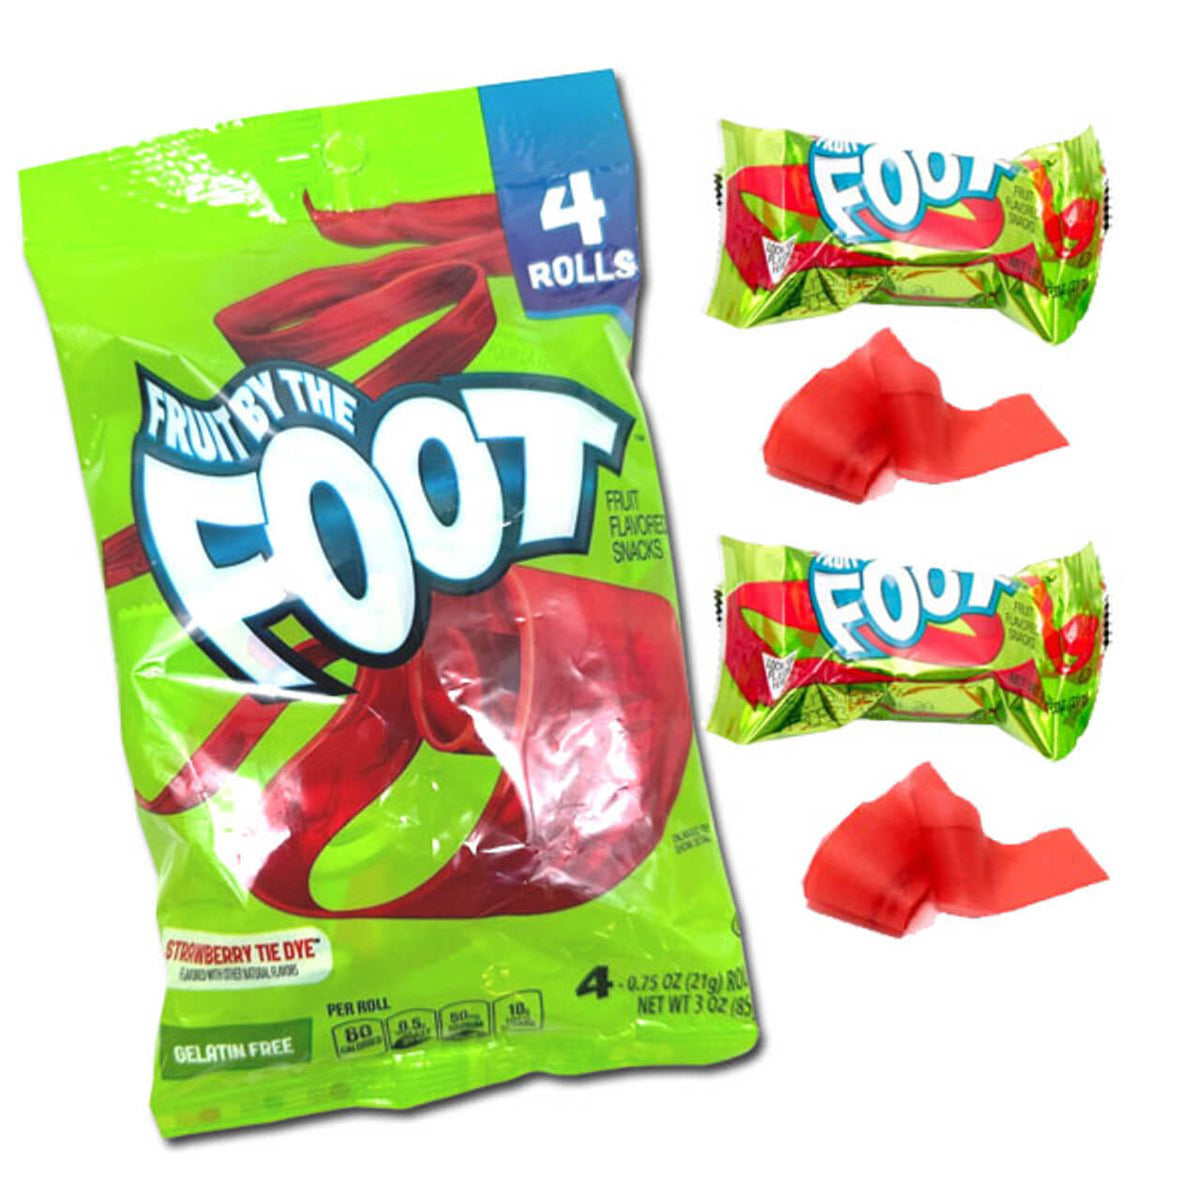 FRUIT BY THE FOOT STRAWBERRY TIE DYE 85g